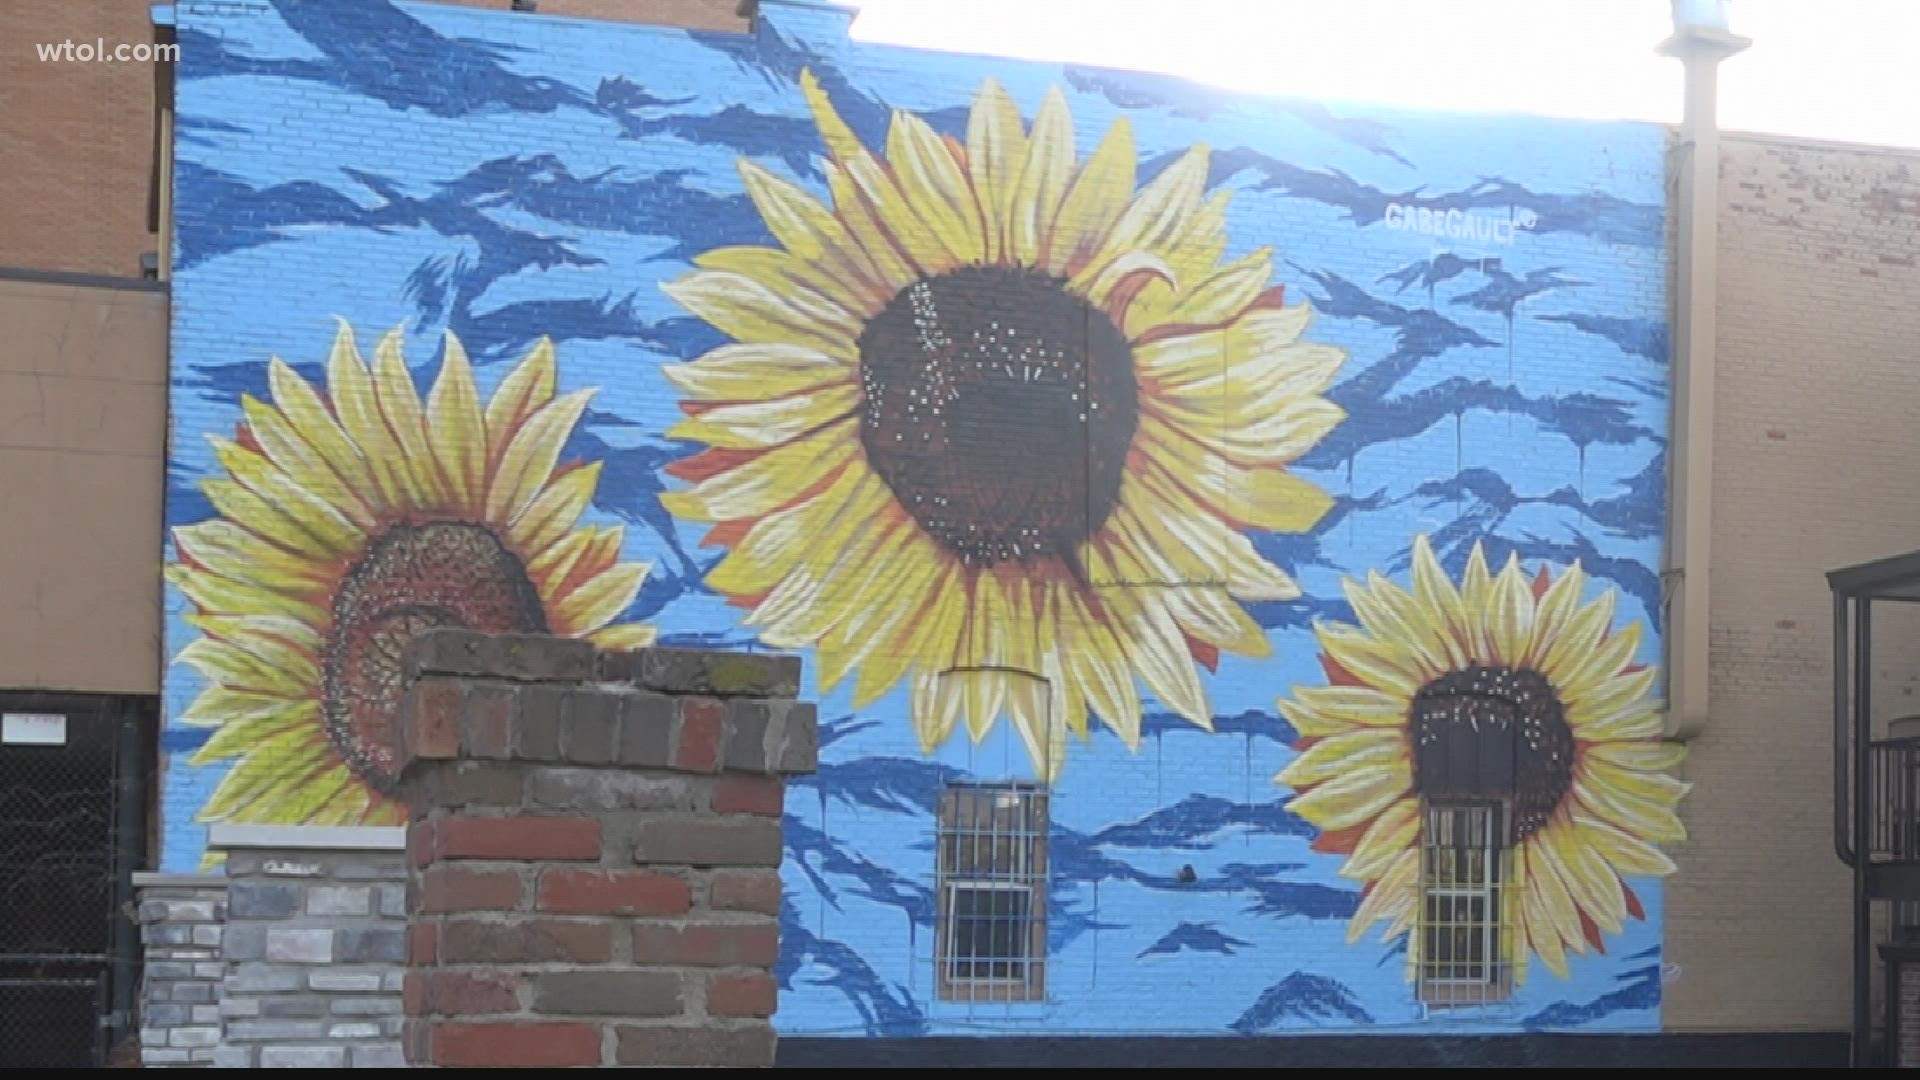 Young artists got a chance to work on their skills and beautify downtown.